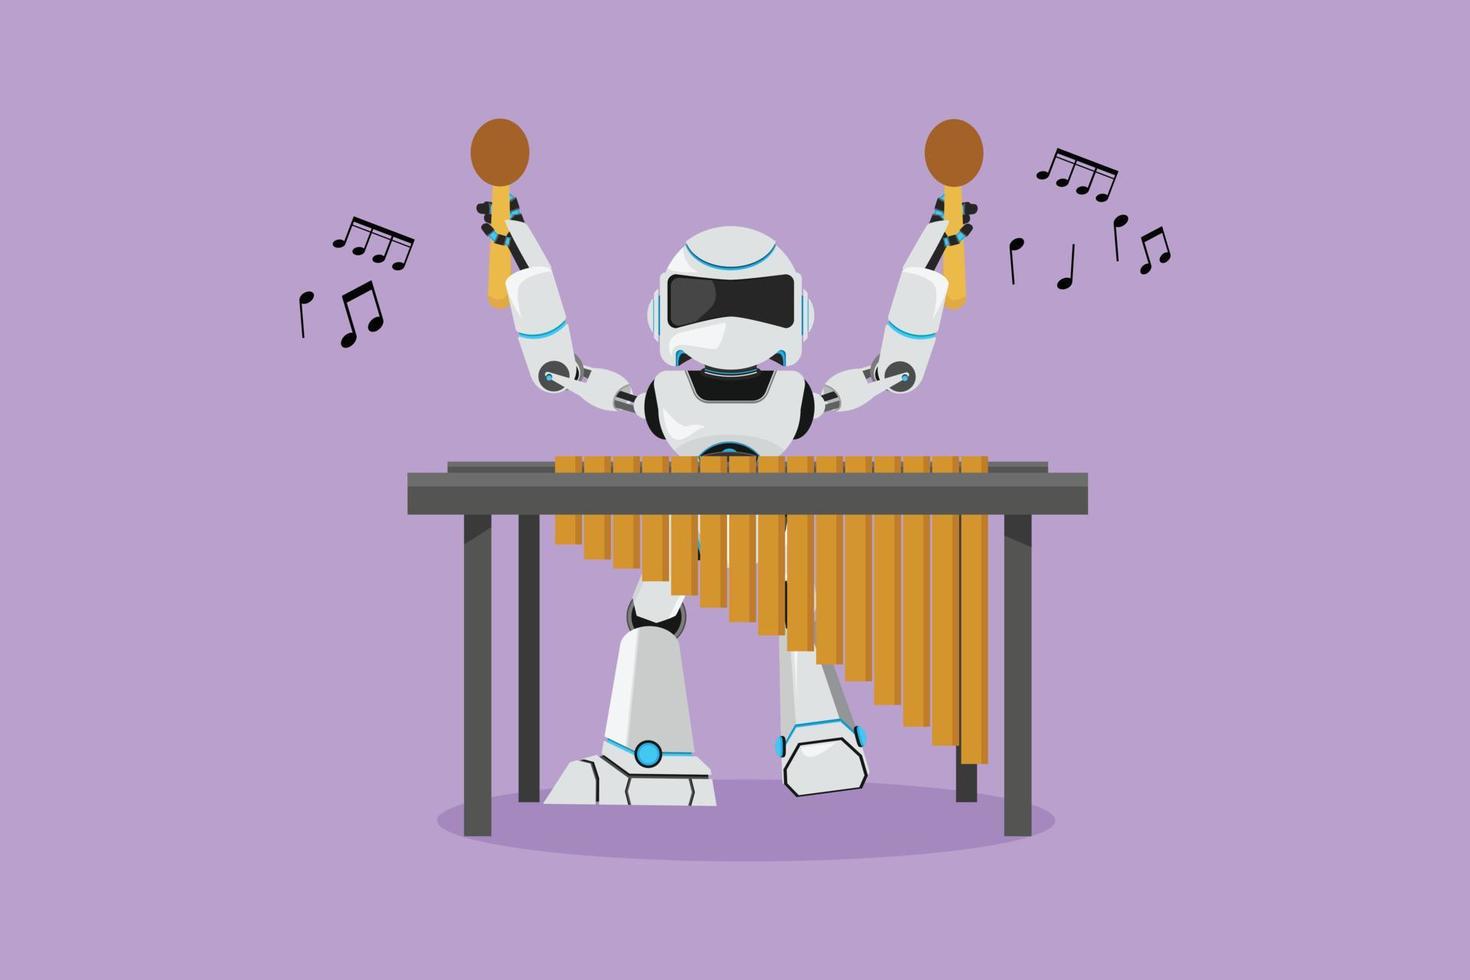 Character flat drawing active robot percussion player play marimba at music folk festival. Robotic musician artificial intelligence. Electronic technology industry. Cartoon design vector illustration